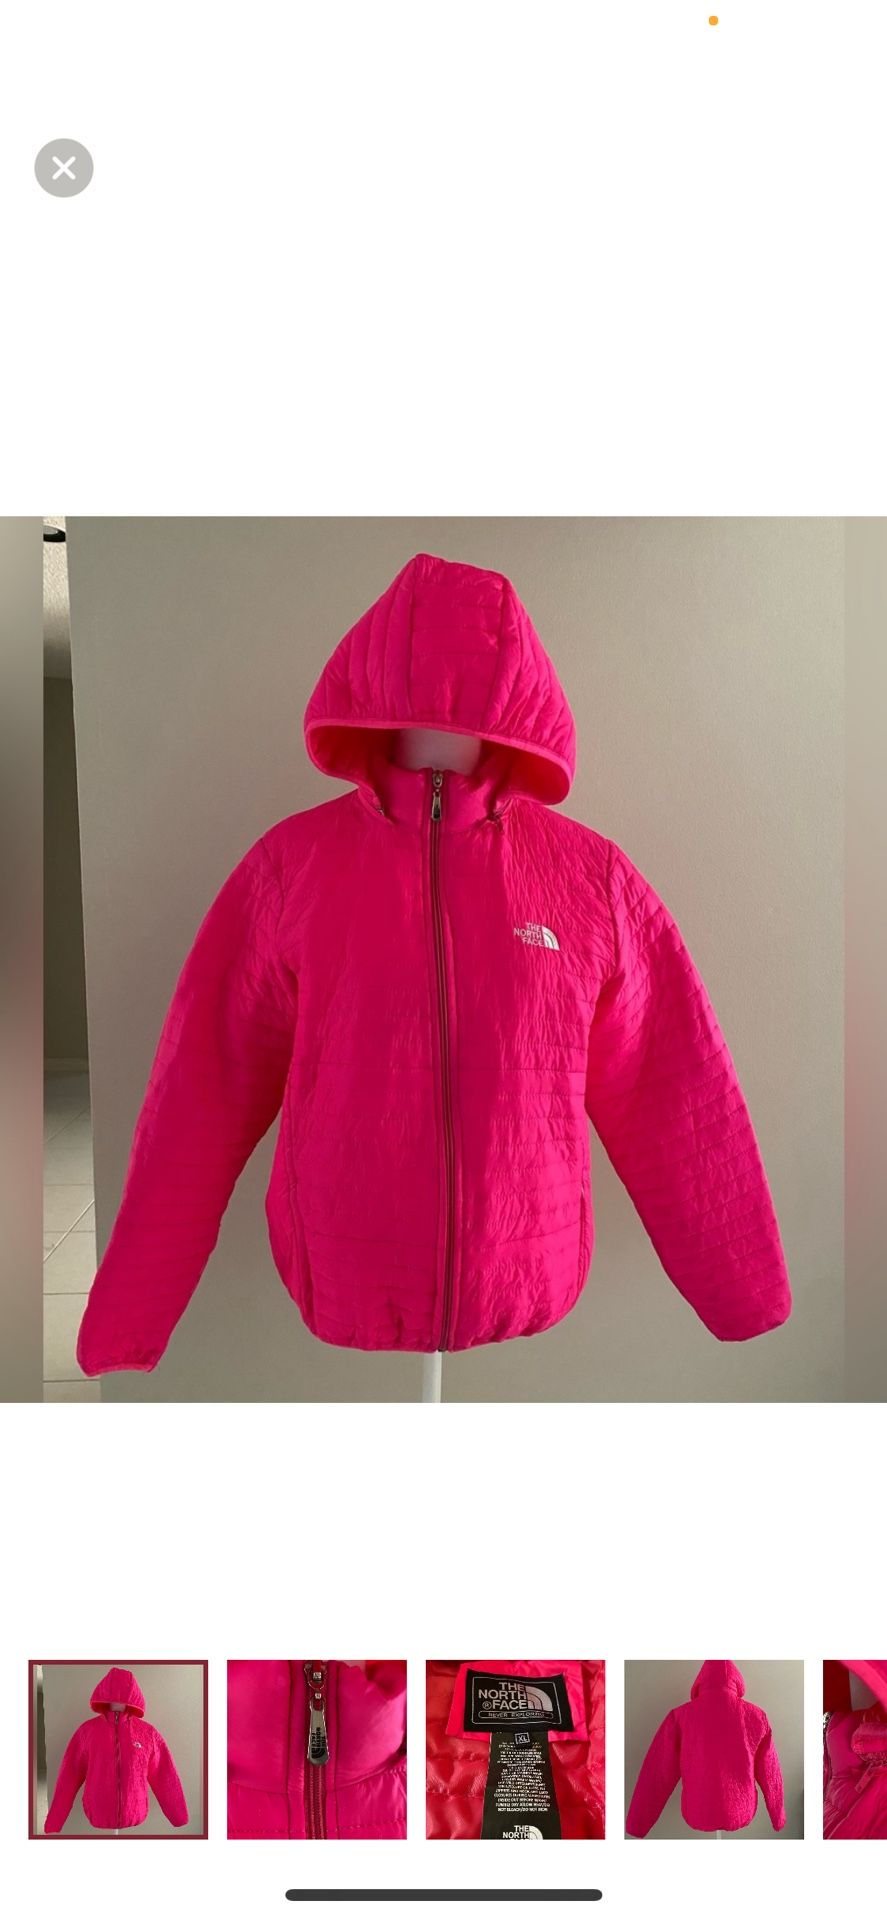 THE NORTH FACE QUILTED LIGHT WEIGHT JACKET IN SHOCKING PINK